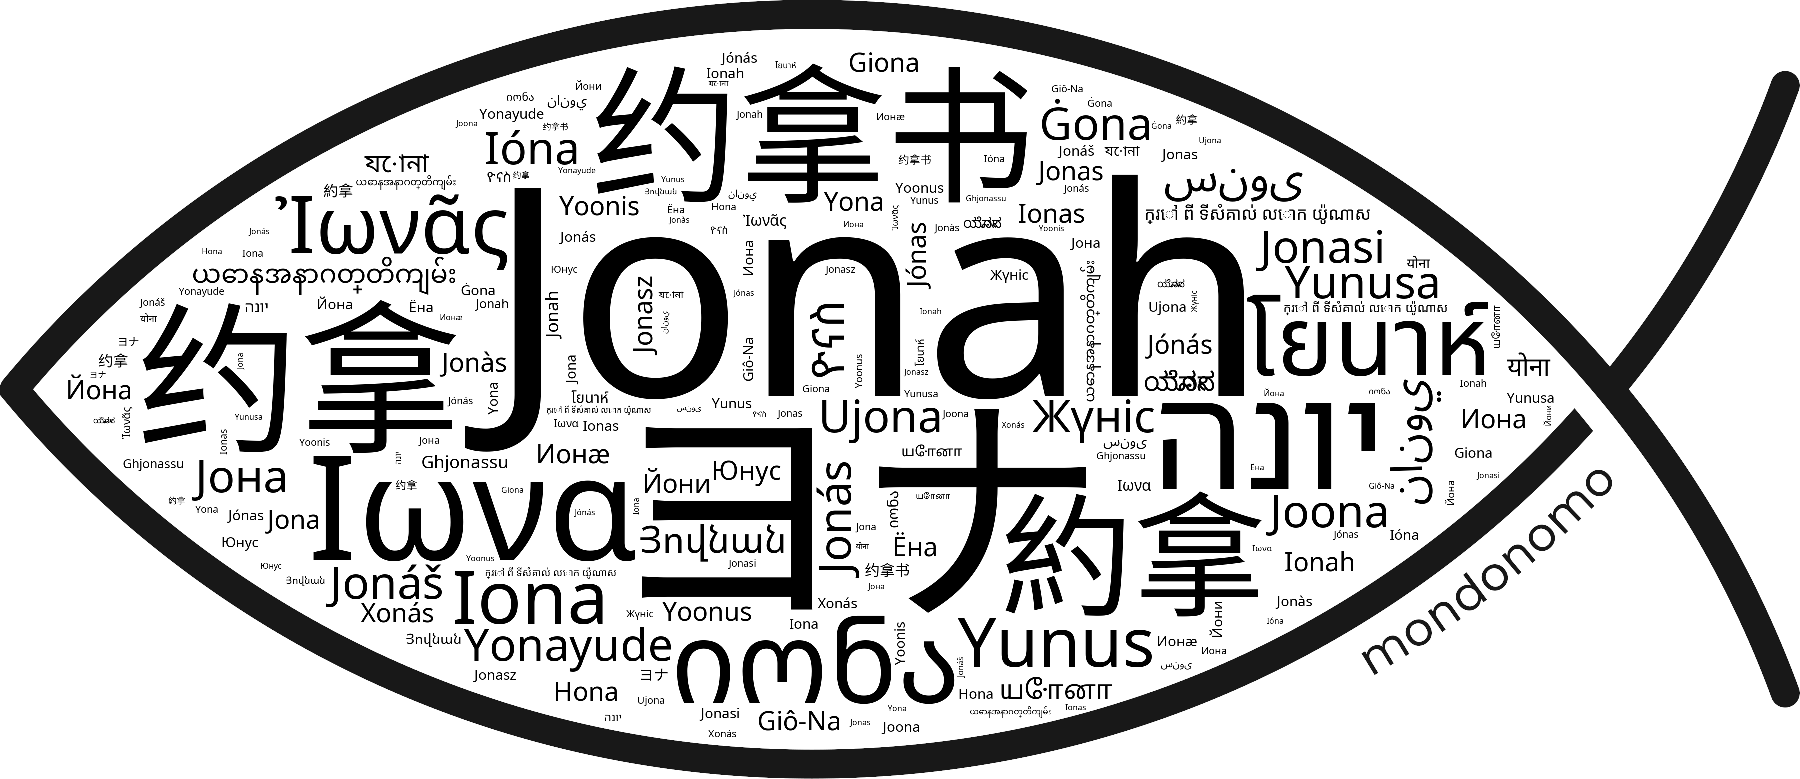 Name Jonah in the world's Bibles